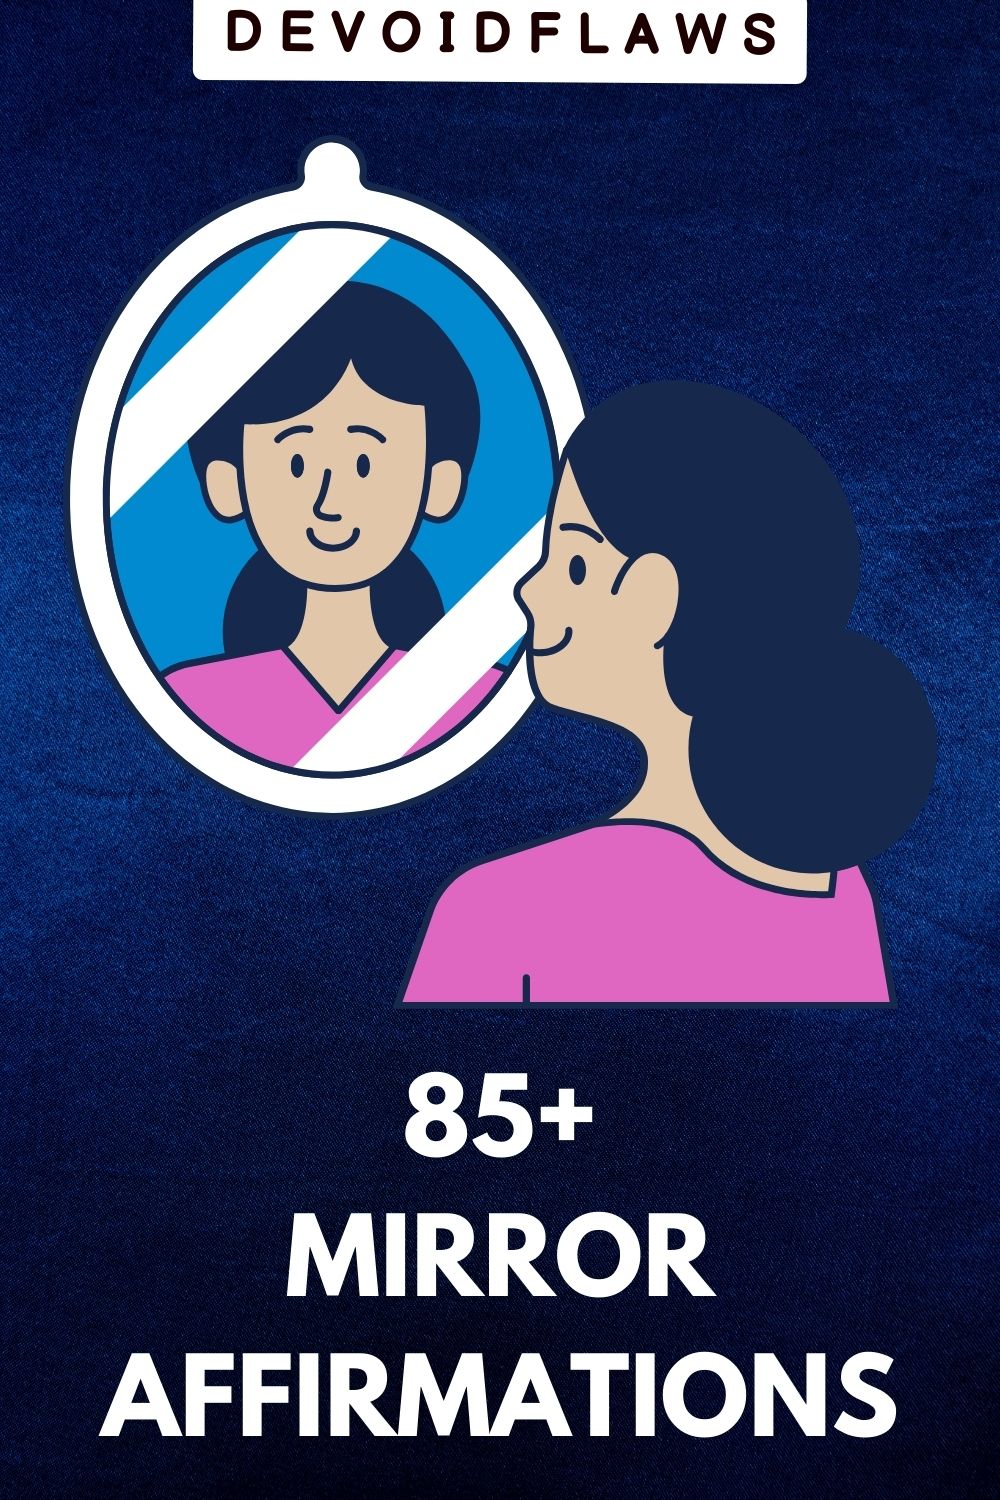 blue background image with text - 85+ mirror affirmations